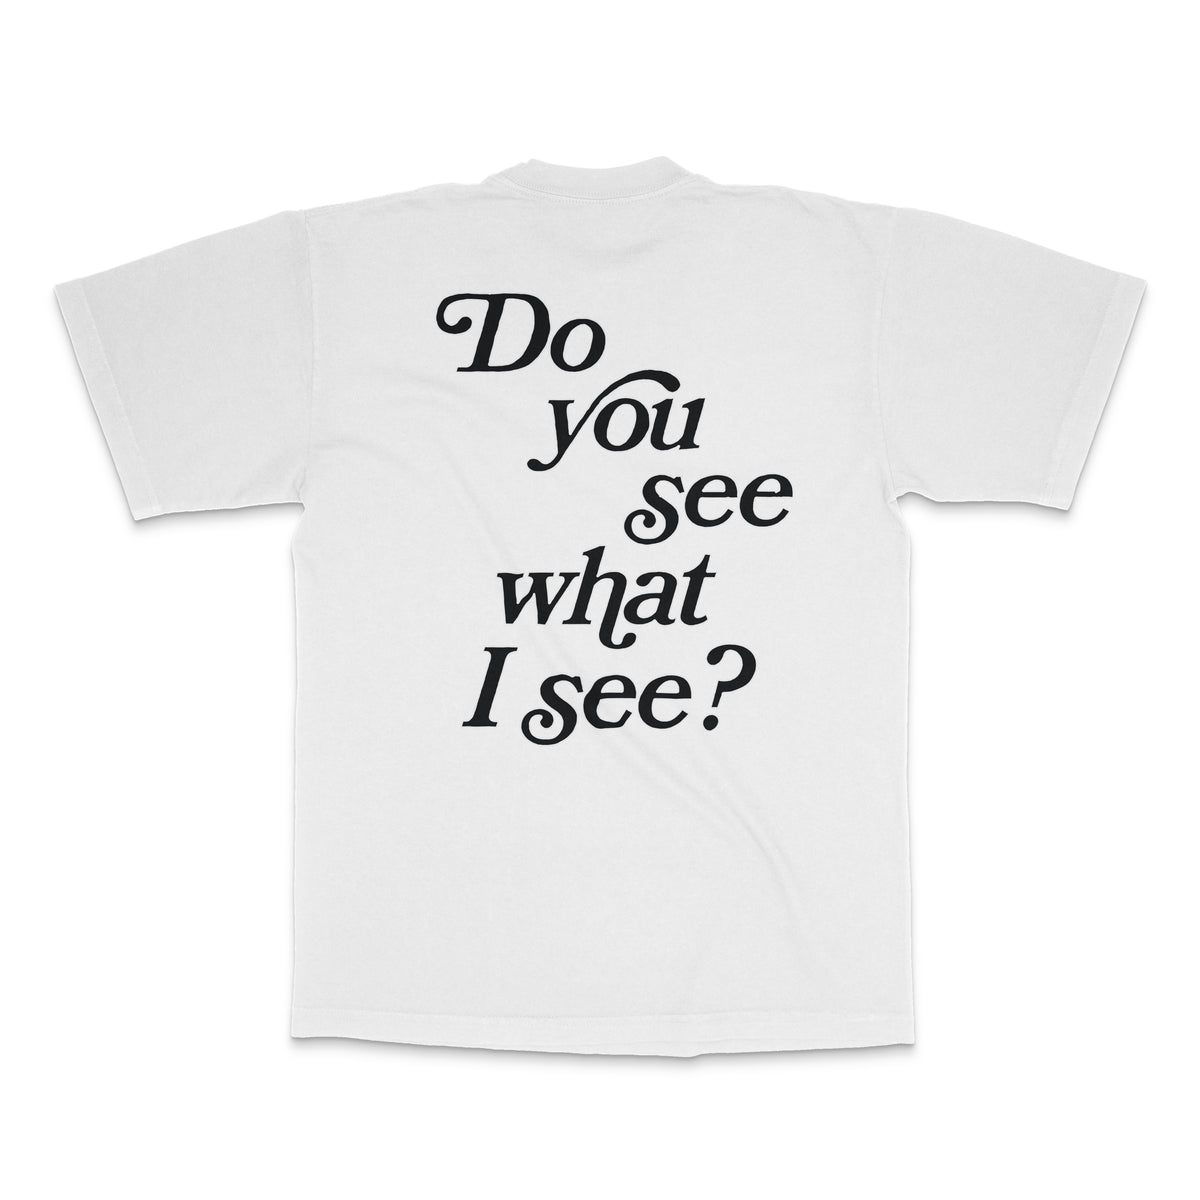 DO YOU SEE? - S/S TEE - WHITE